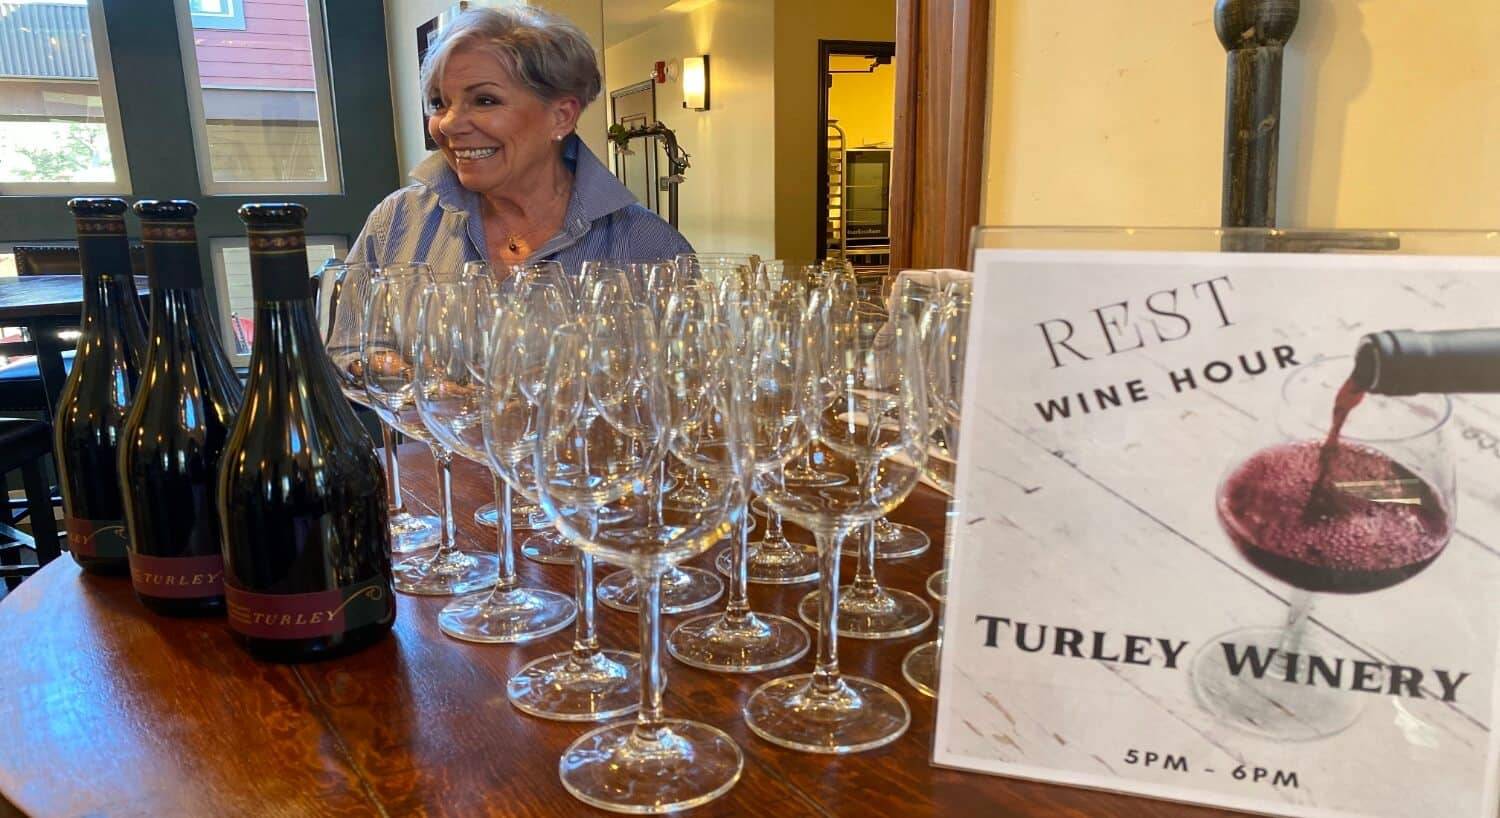 a table with bottles of wine and lots of wine glasses, and a sign that says Rest Wine Hour and Turley Winery, and a smiling woman